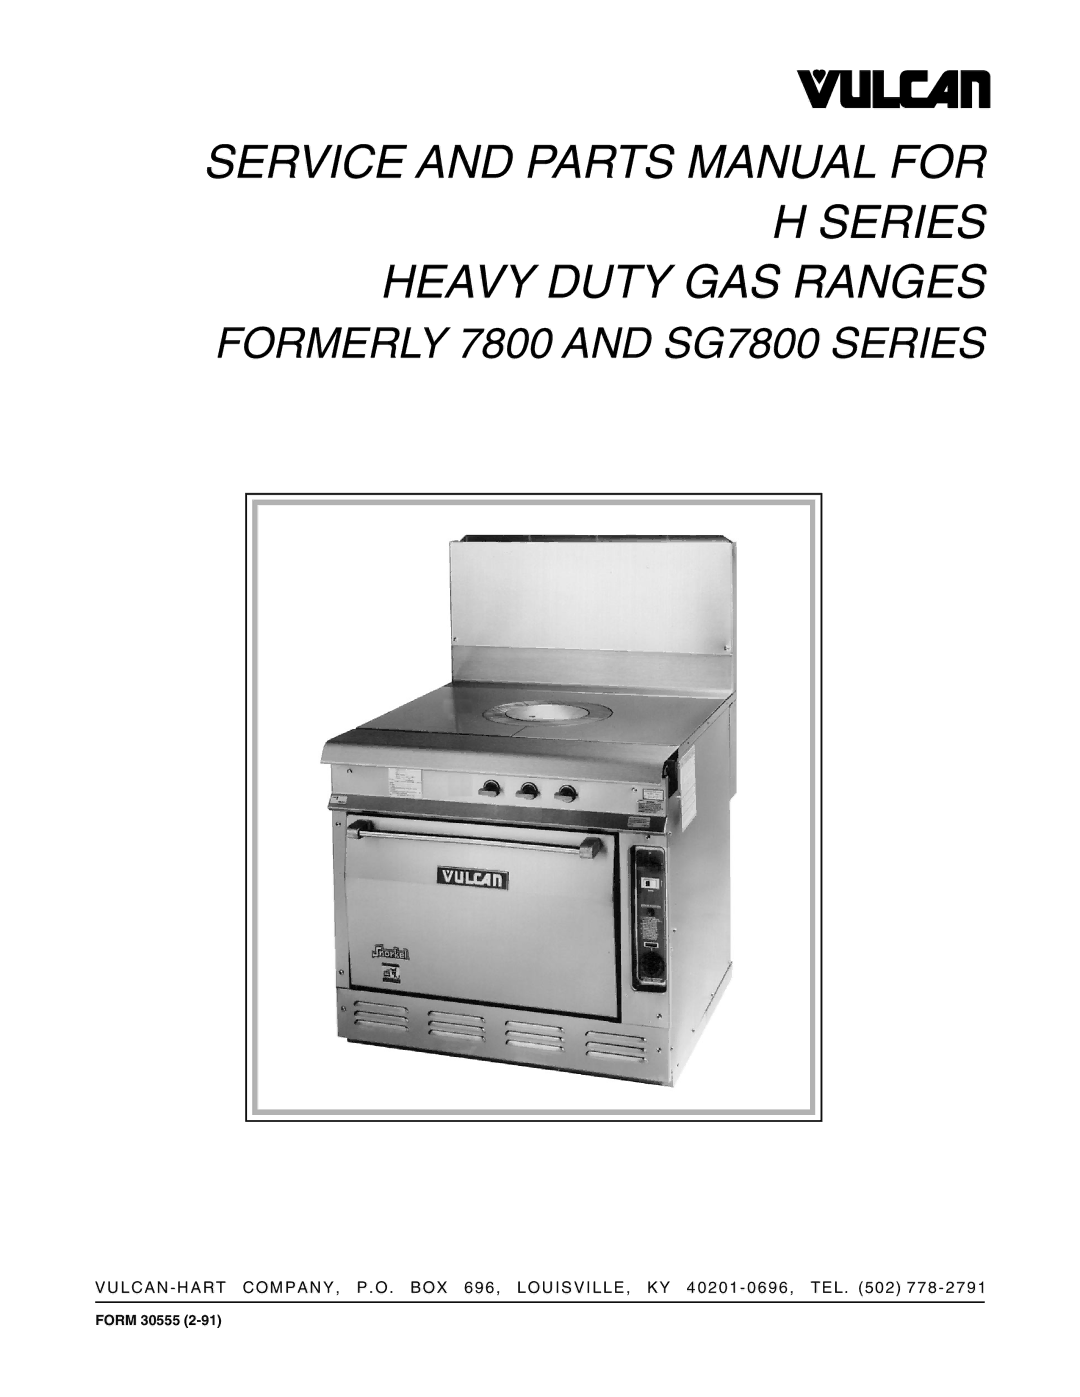 Vulcan-Hart SG7800 manual Service and Parts Manual for H Series Heavy Duty GAS Ranges 